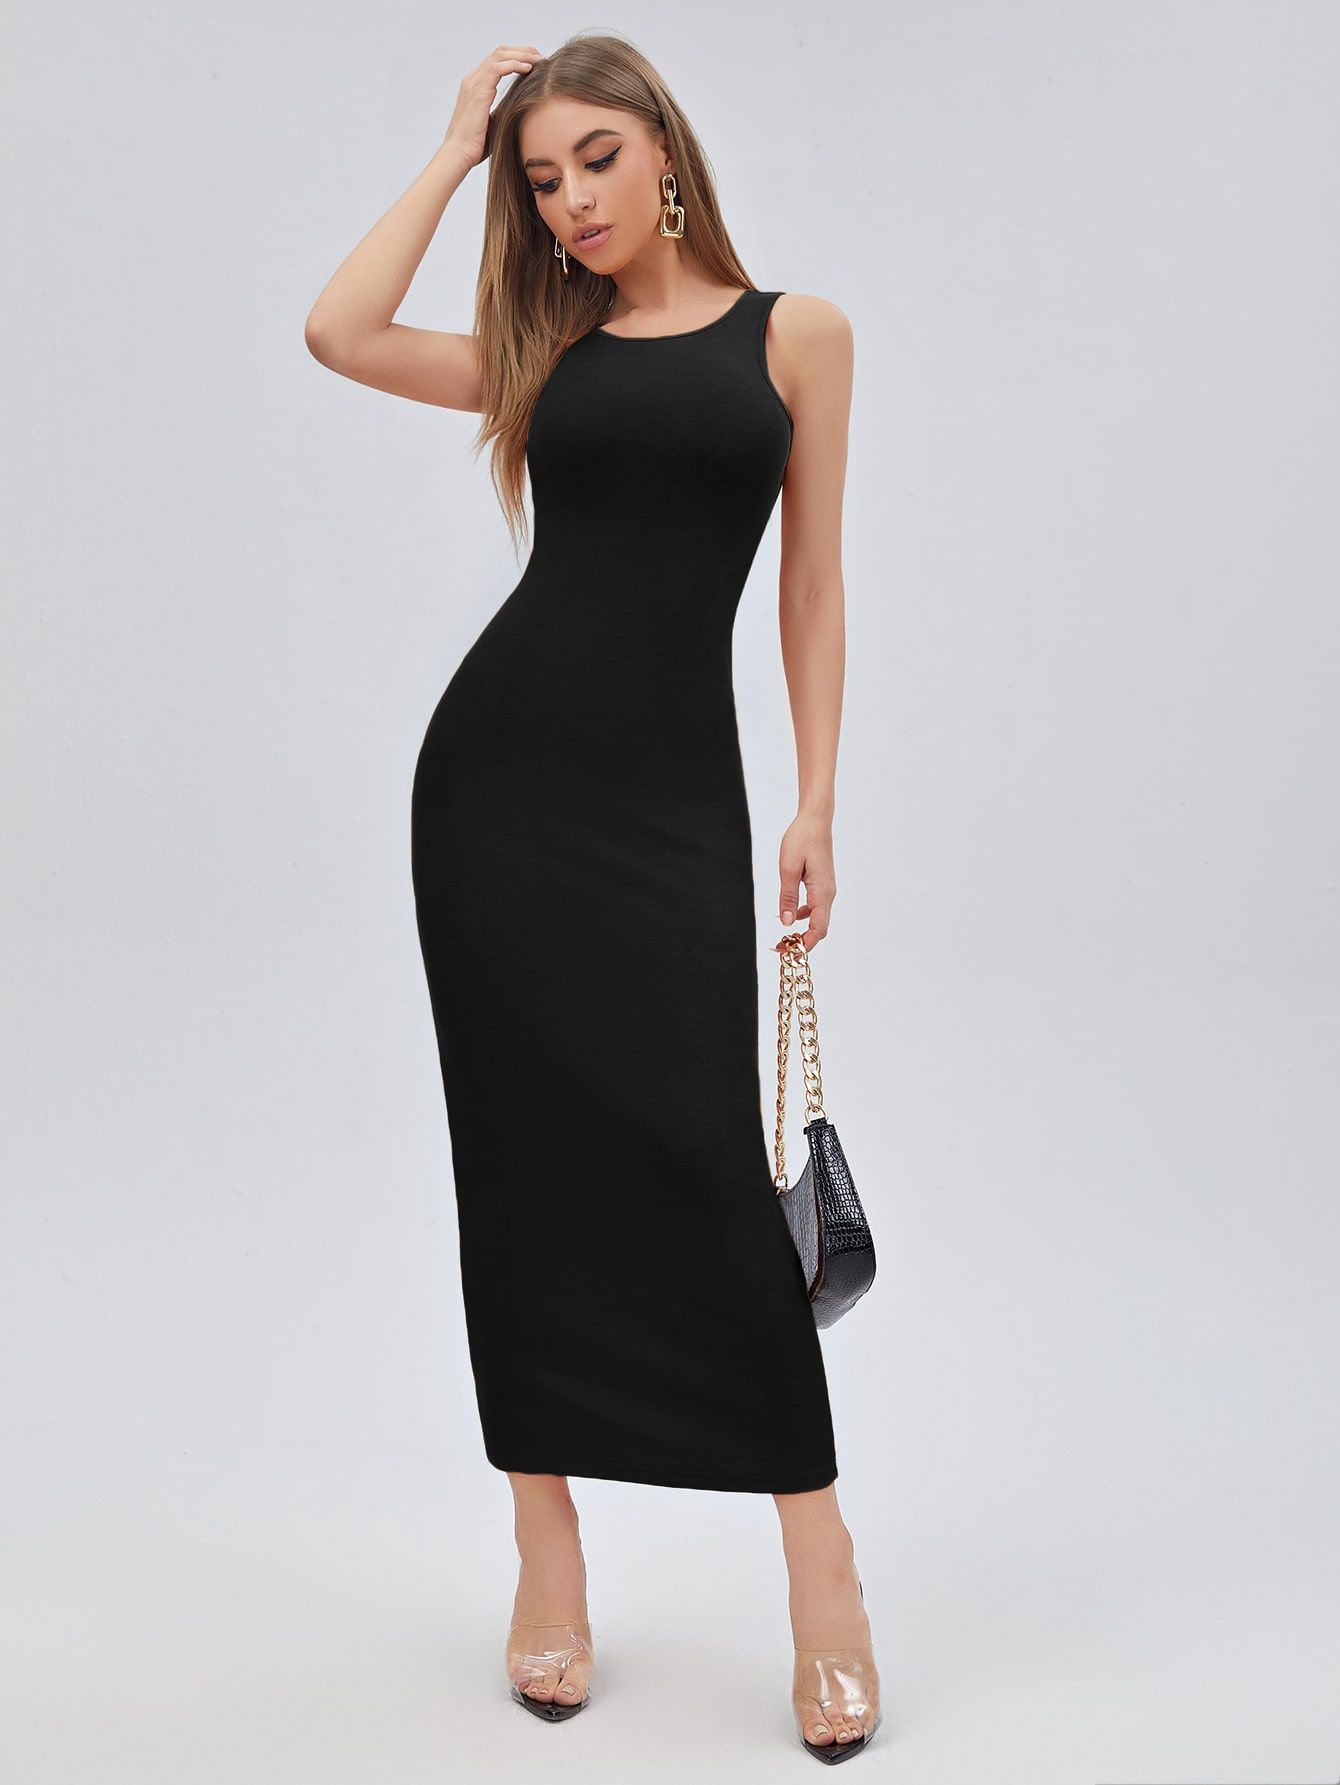 SHEIN Privé Solid Form Fitted Dress | SHEIN